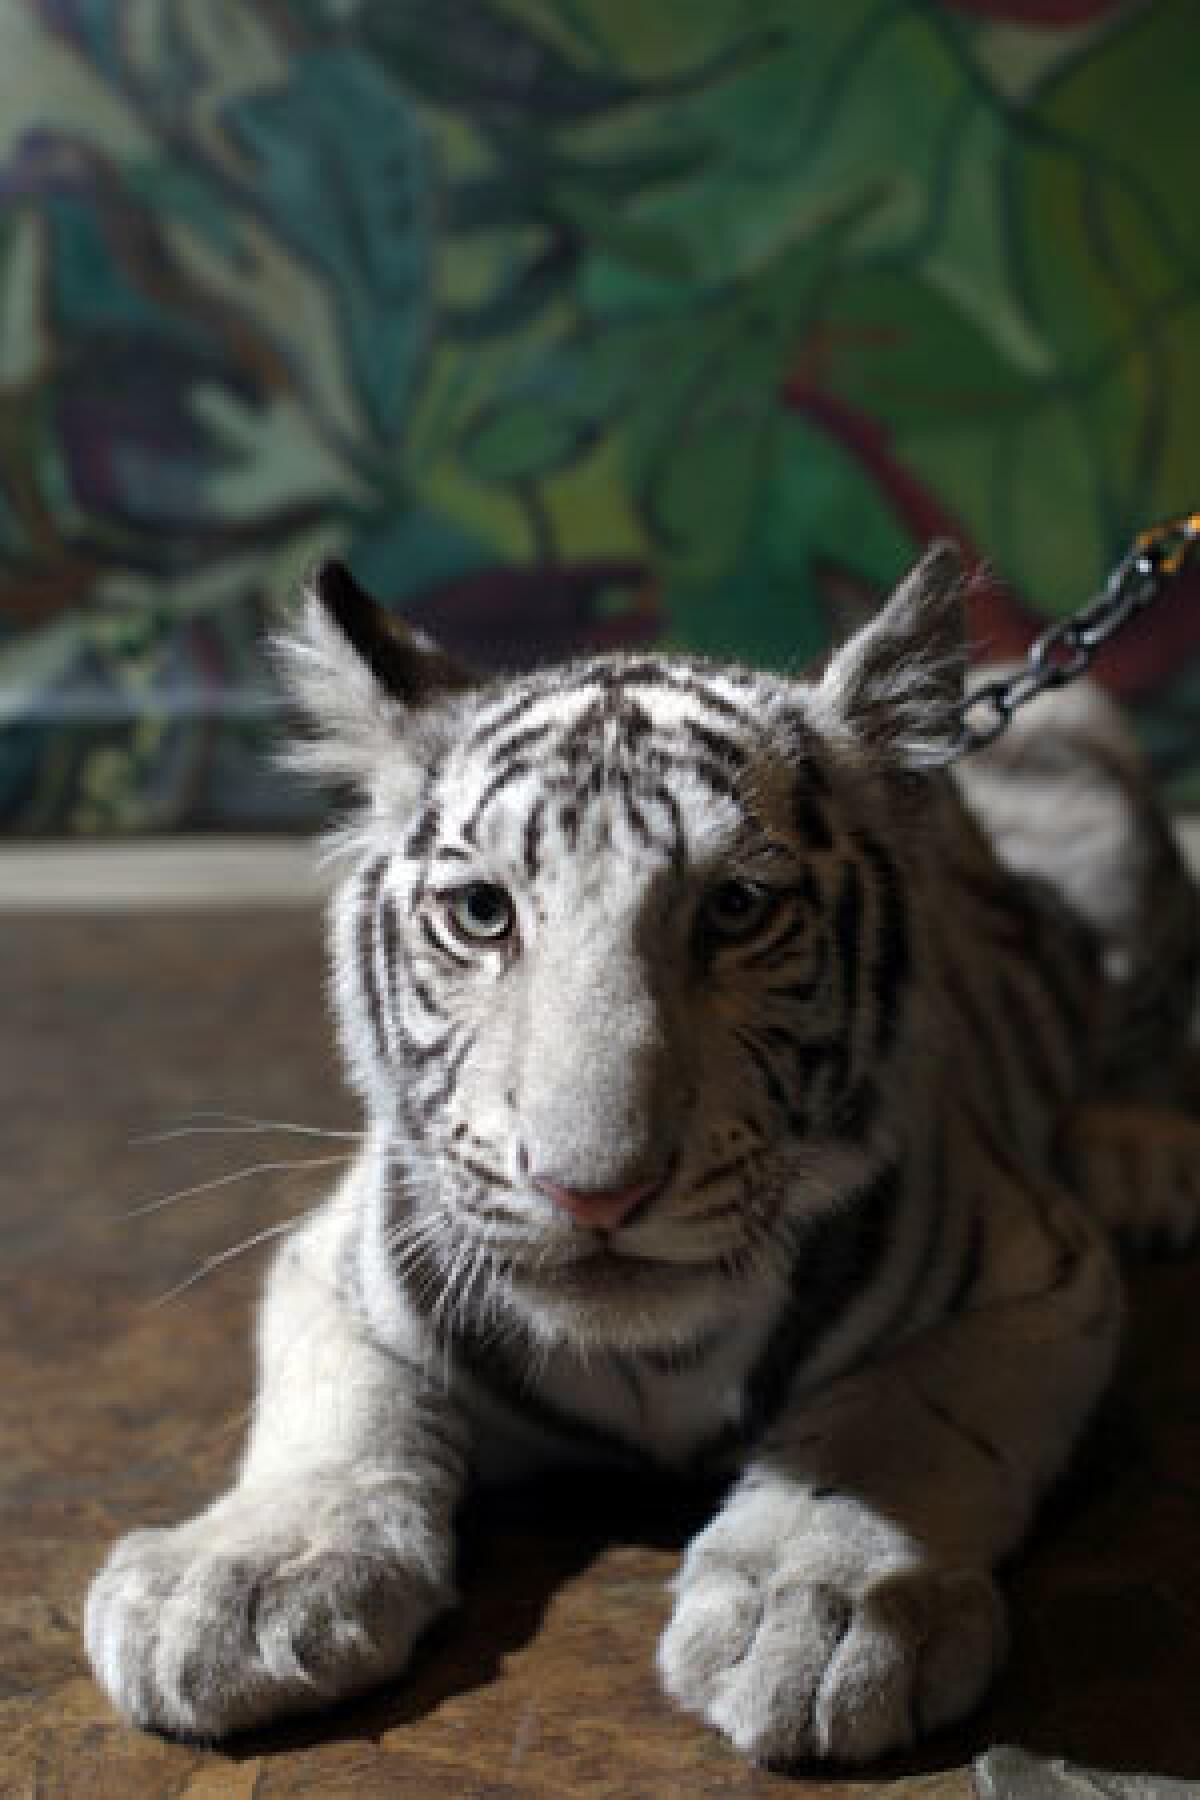 The object of affection in Colleen Houck's "Tiger's Curse" is a regal feline.